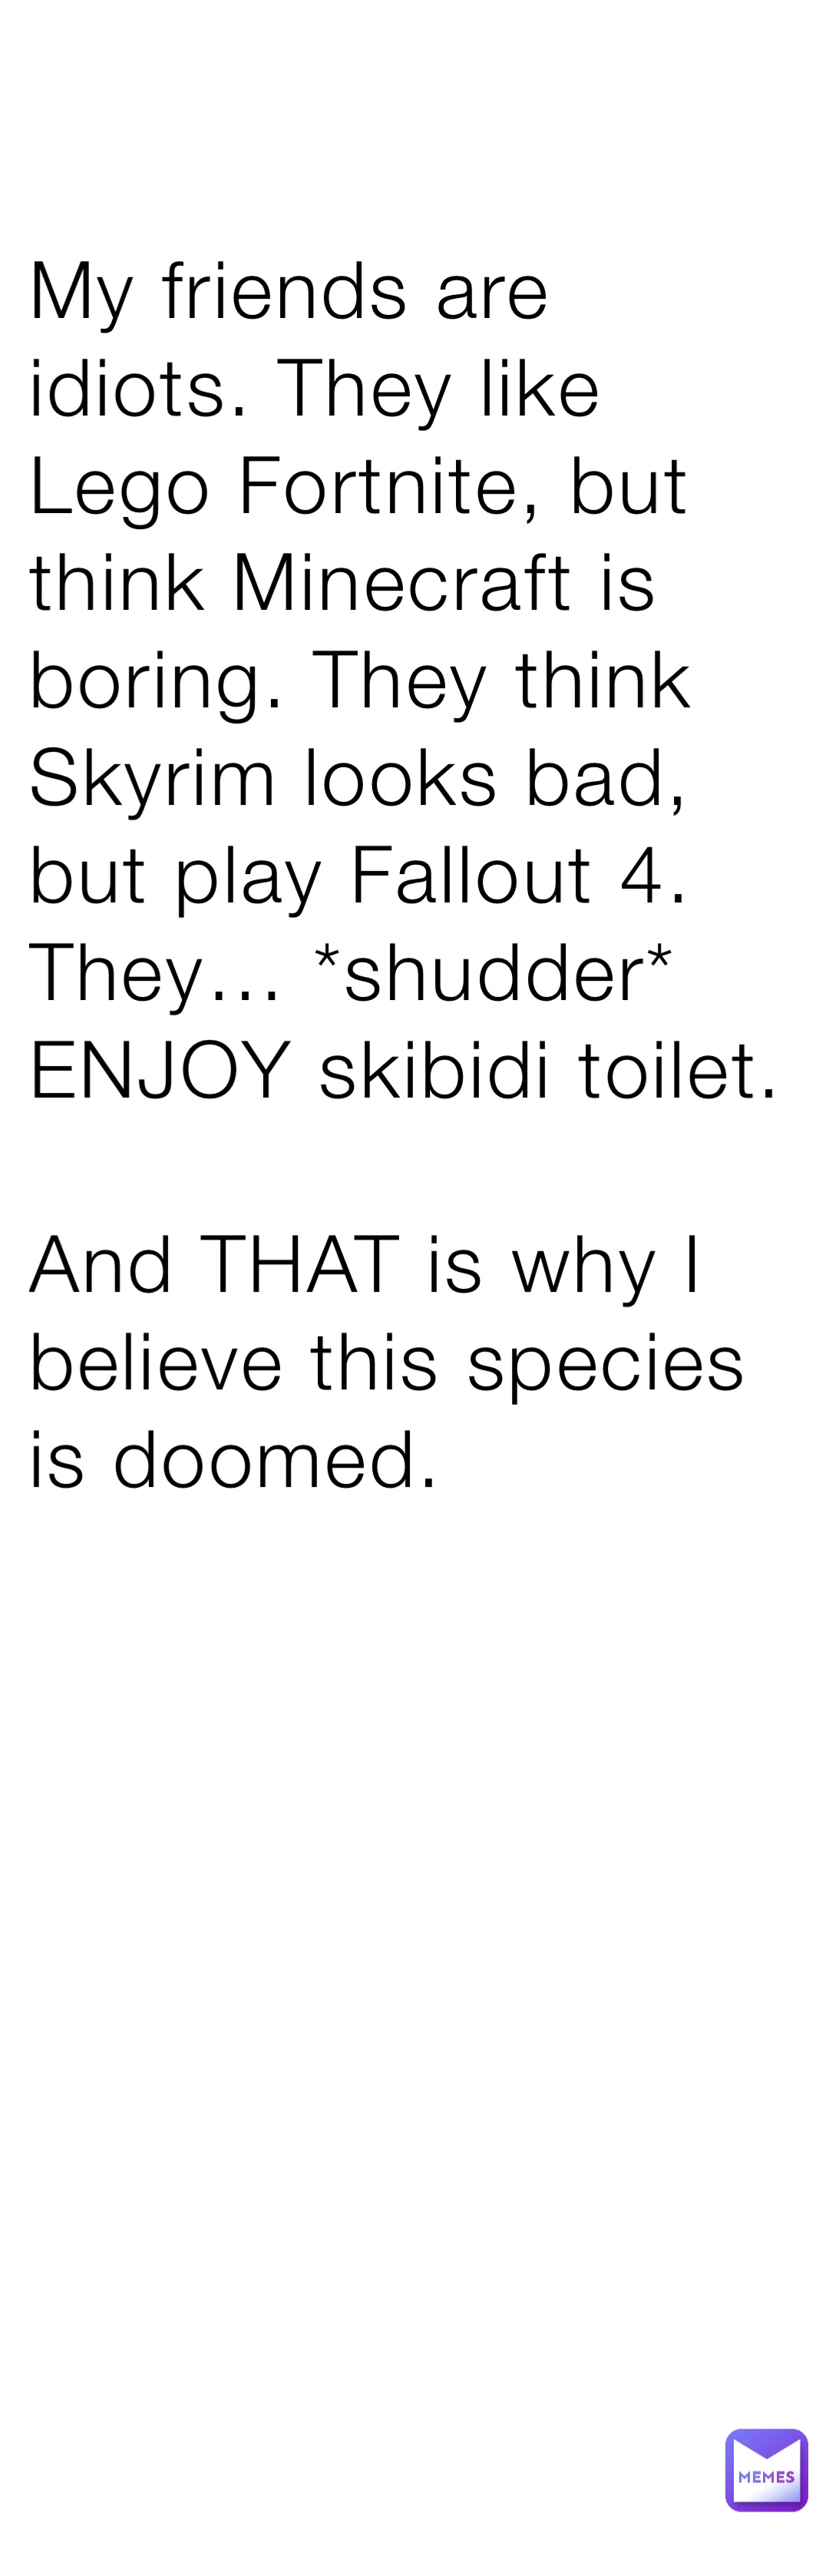 My friends are idiots. They like Lego Fortnite, but think Minecraft is boring. They think Skyrim looks bad, but play Fallout 4. They… *shudder* ENJOY skibidi toilet. 

And THAT is why I believe this species is doomed.